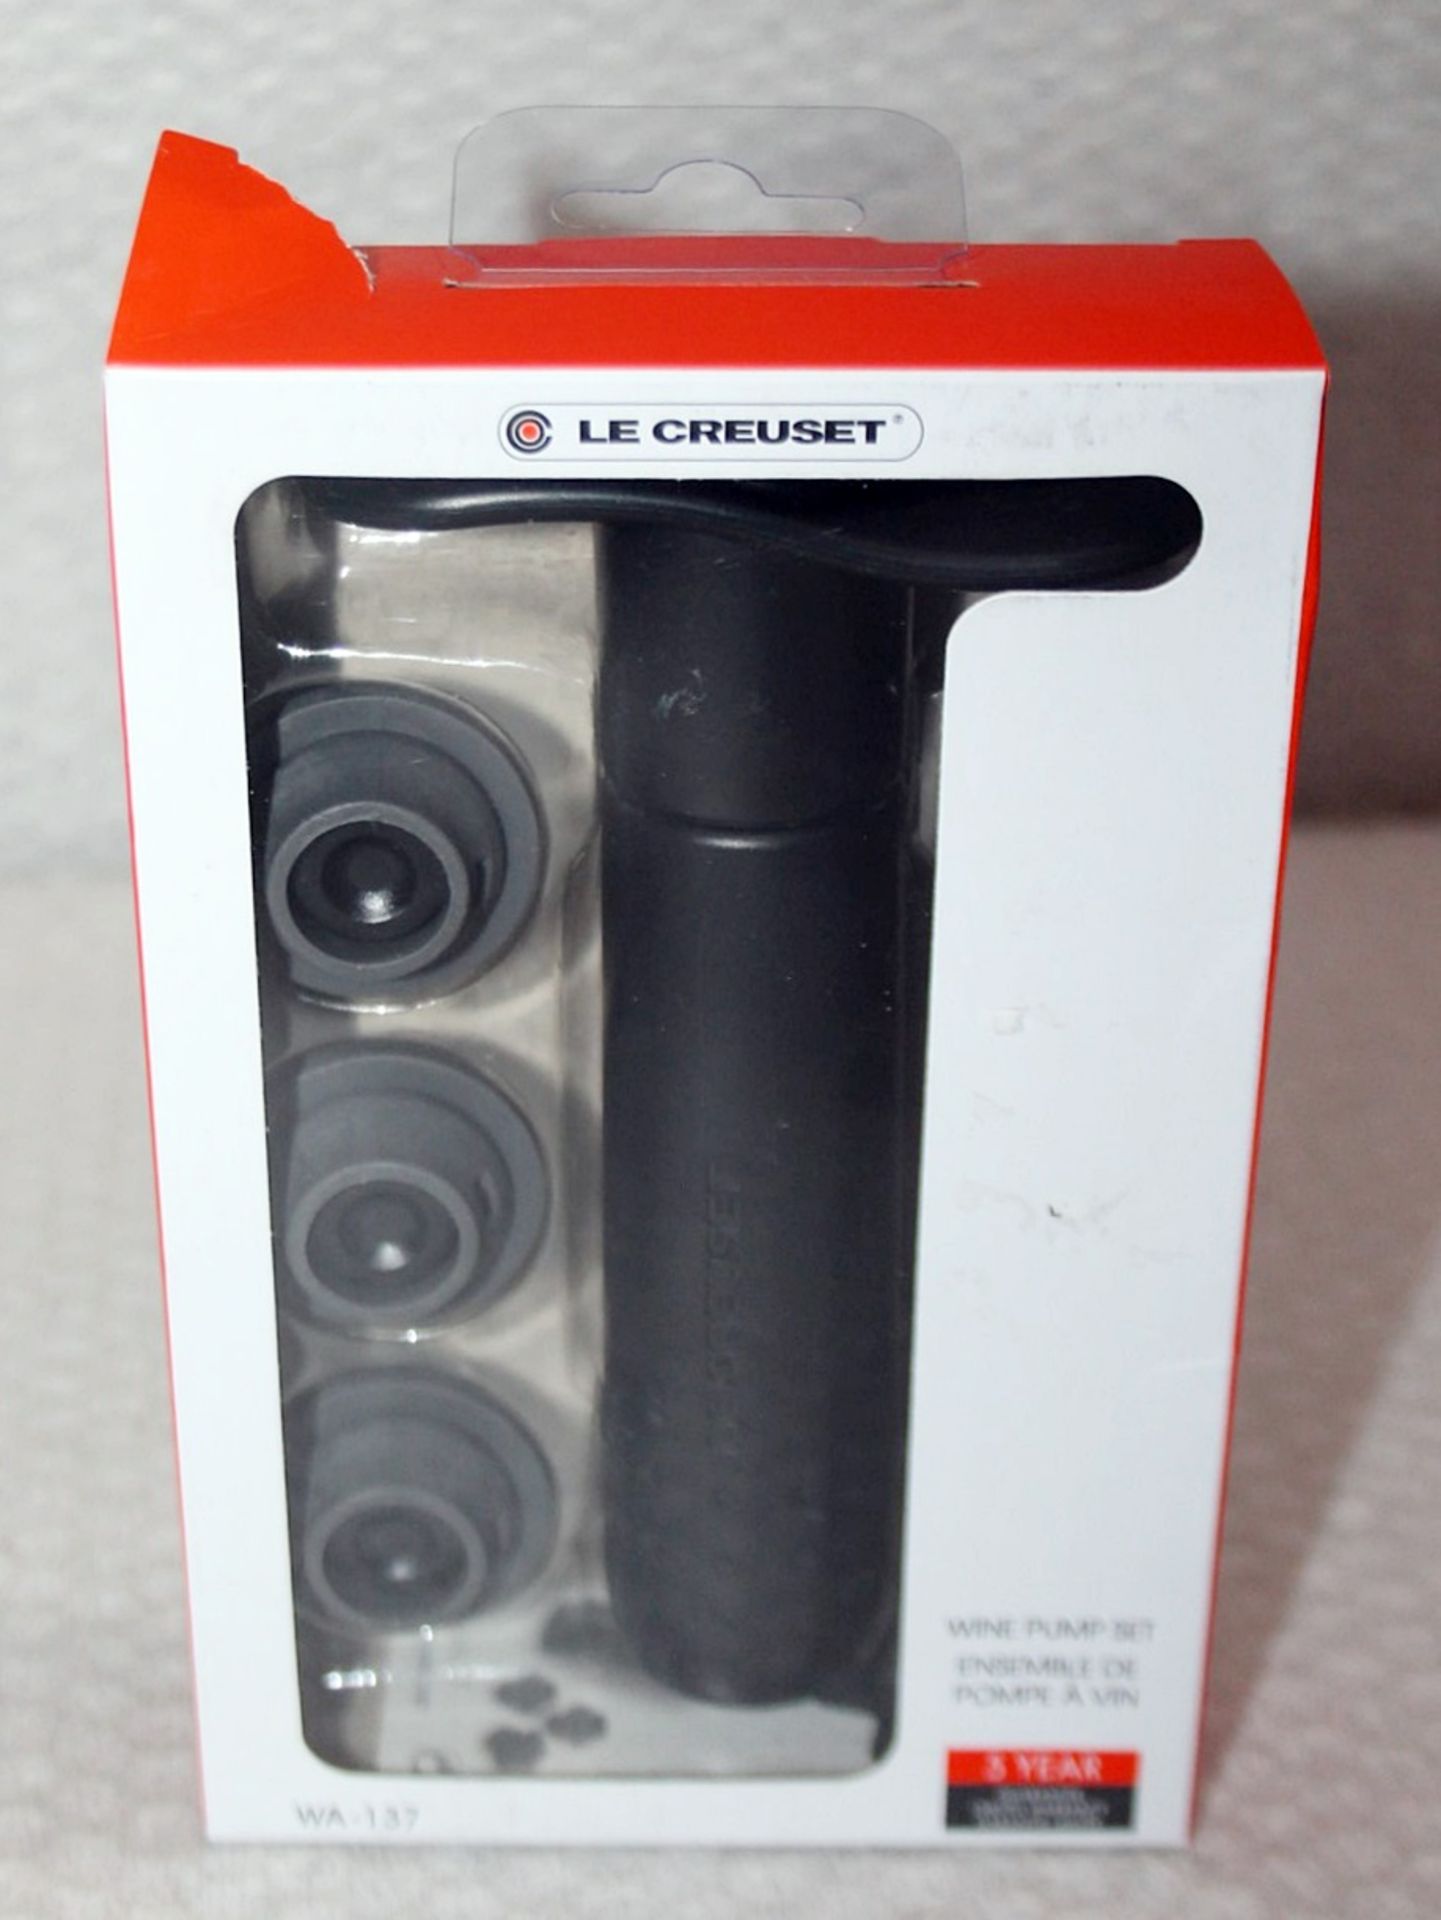 1 x LE CREUSET Wine Pump and Stoppers (WA-137) - Unused Boxed Stock - Ref: HAS441/FEB22/WH2/C6 - - Image 4 of 5